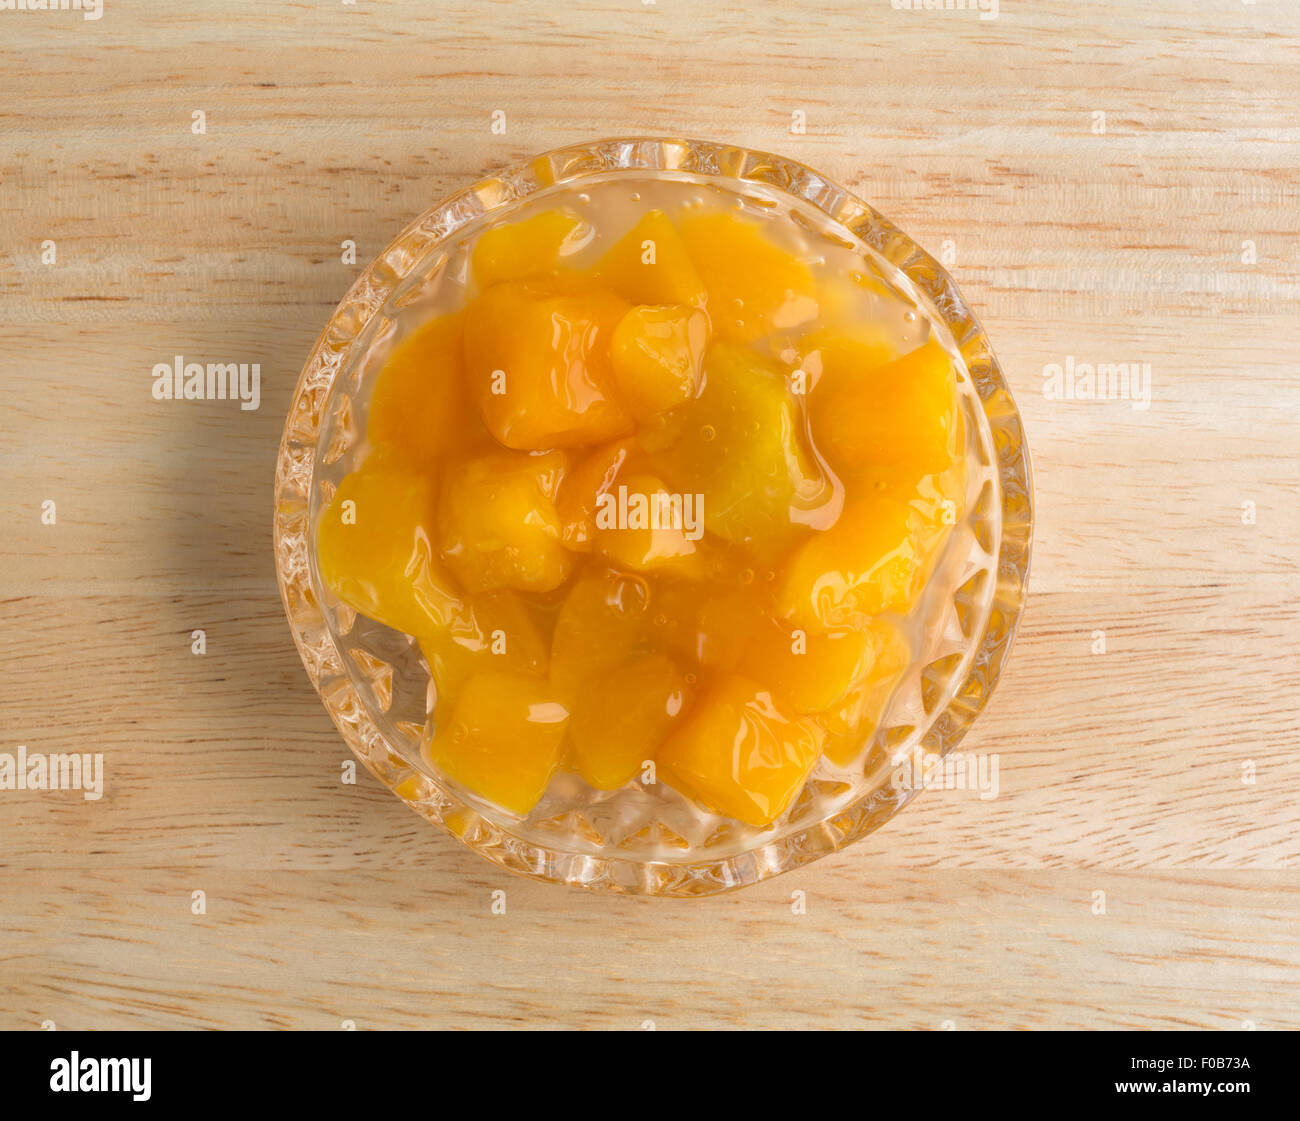 Top view of a small glass bowl of diced peaches in heavy syrup on a wood table top illuminated with natural light. Stock Photo